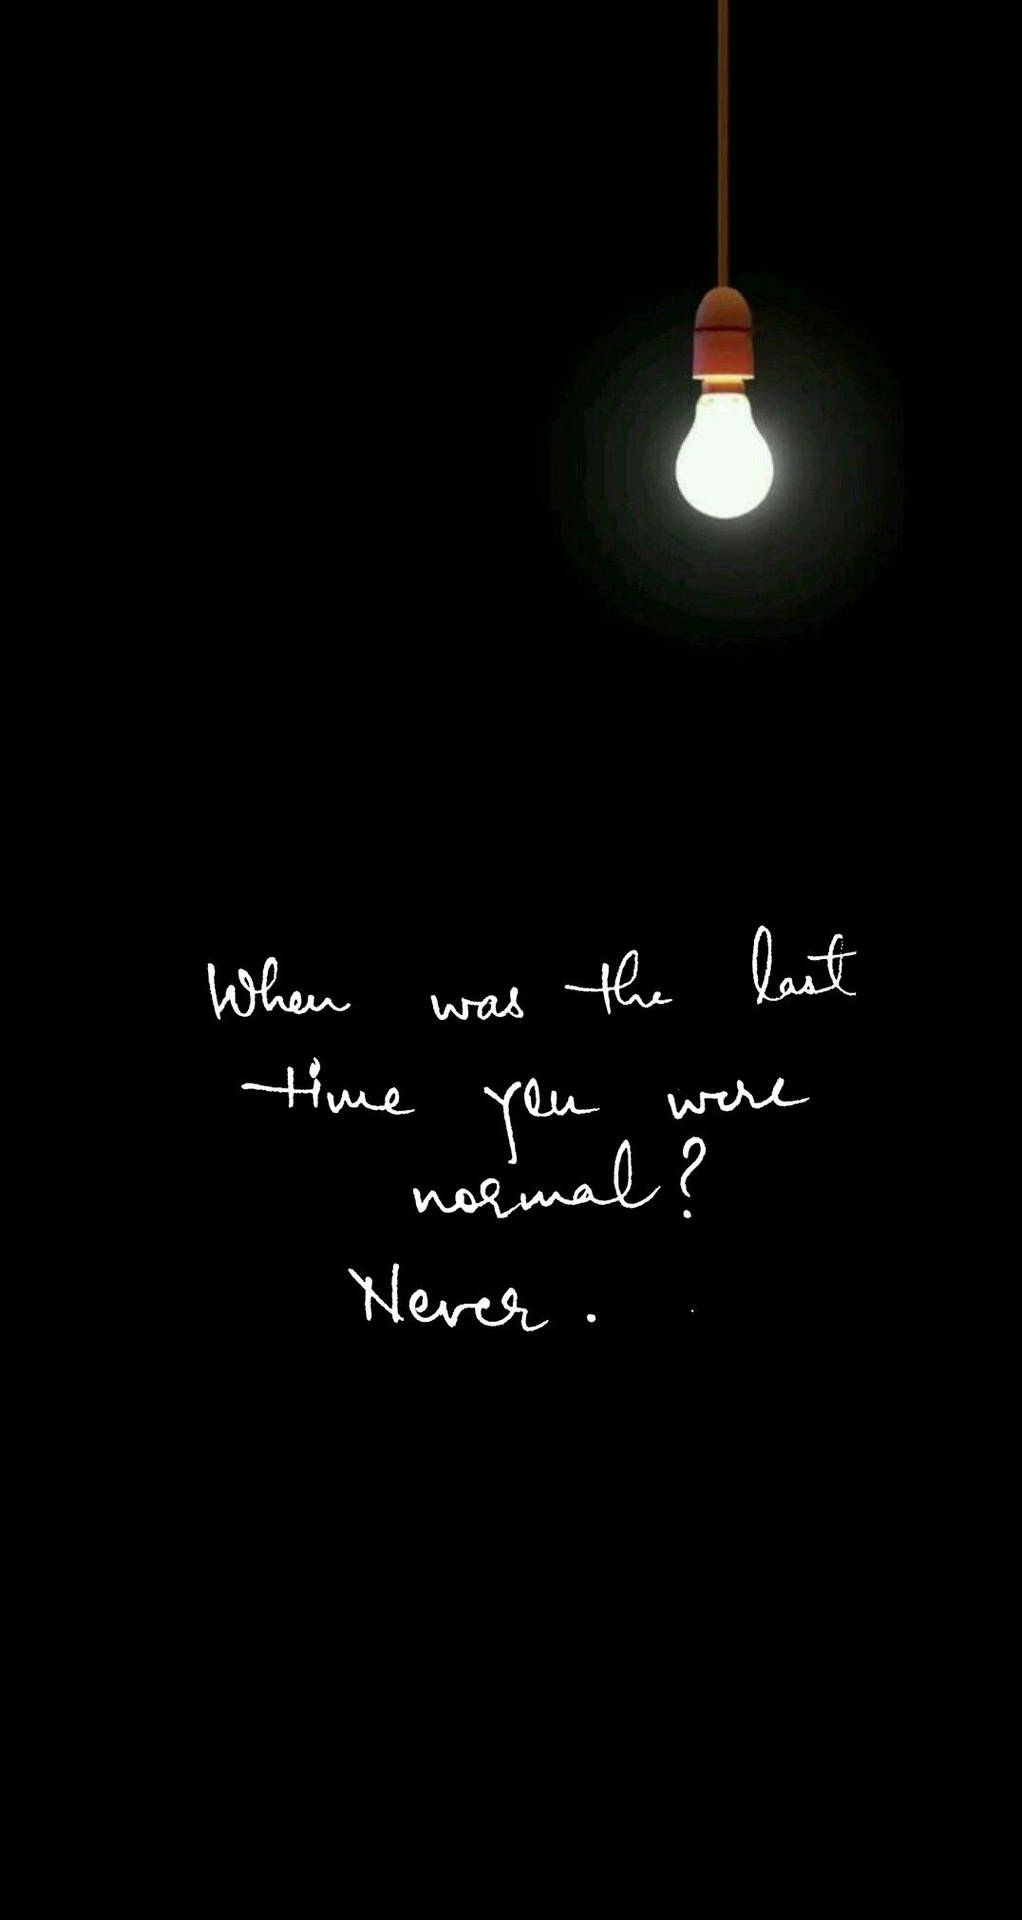 Download Tumblr Aesthetic Quote With Bulb Wallpaper 